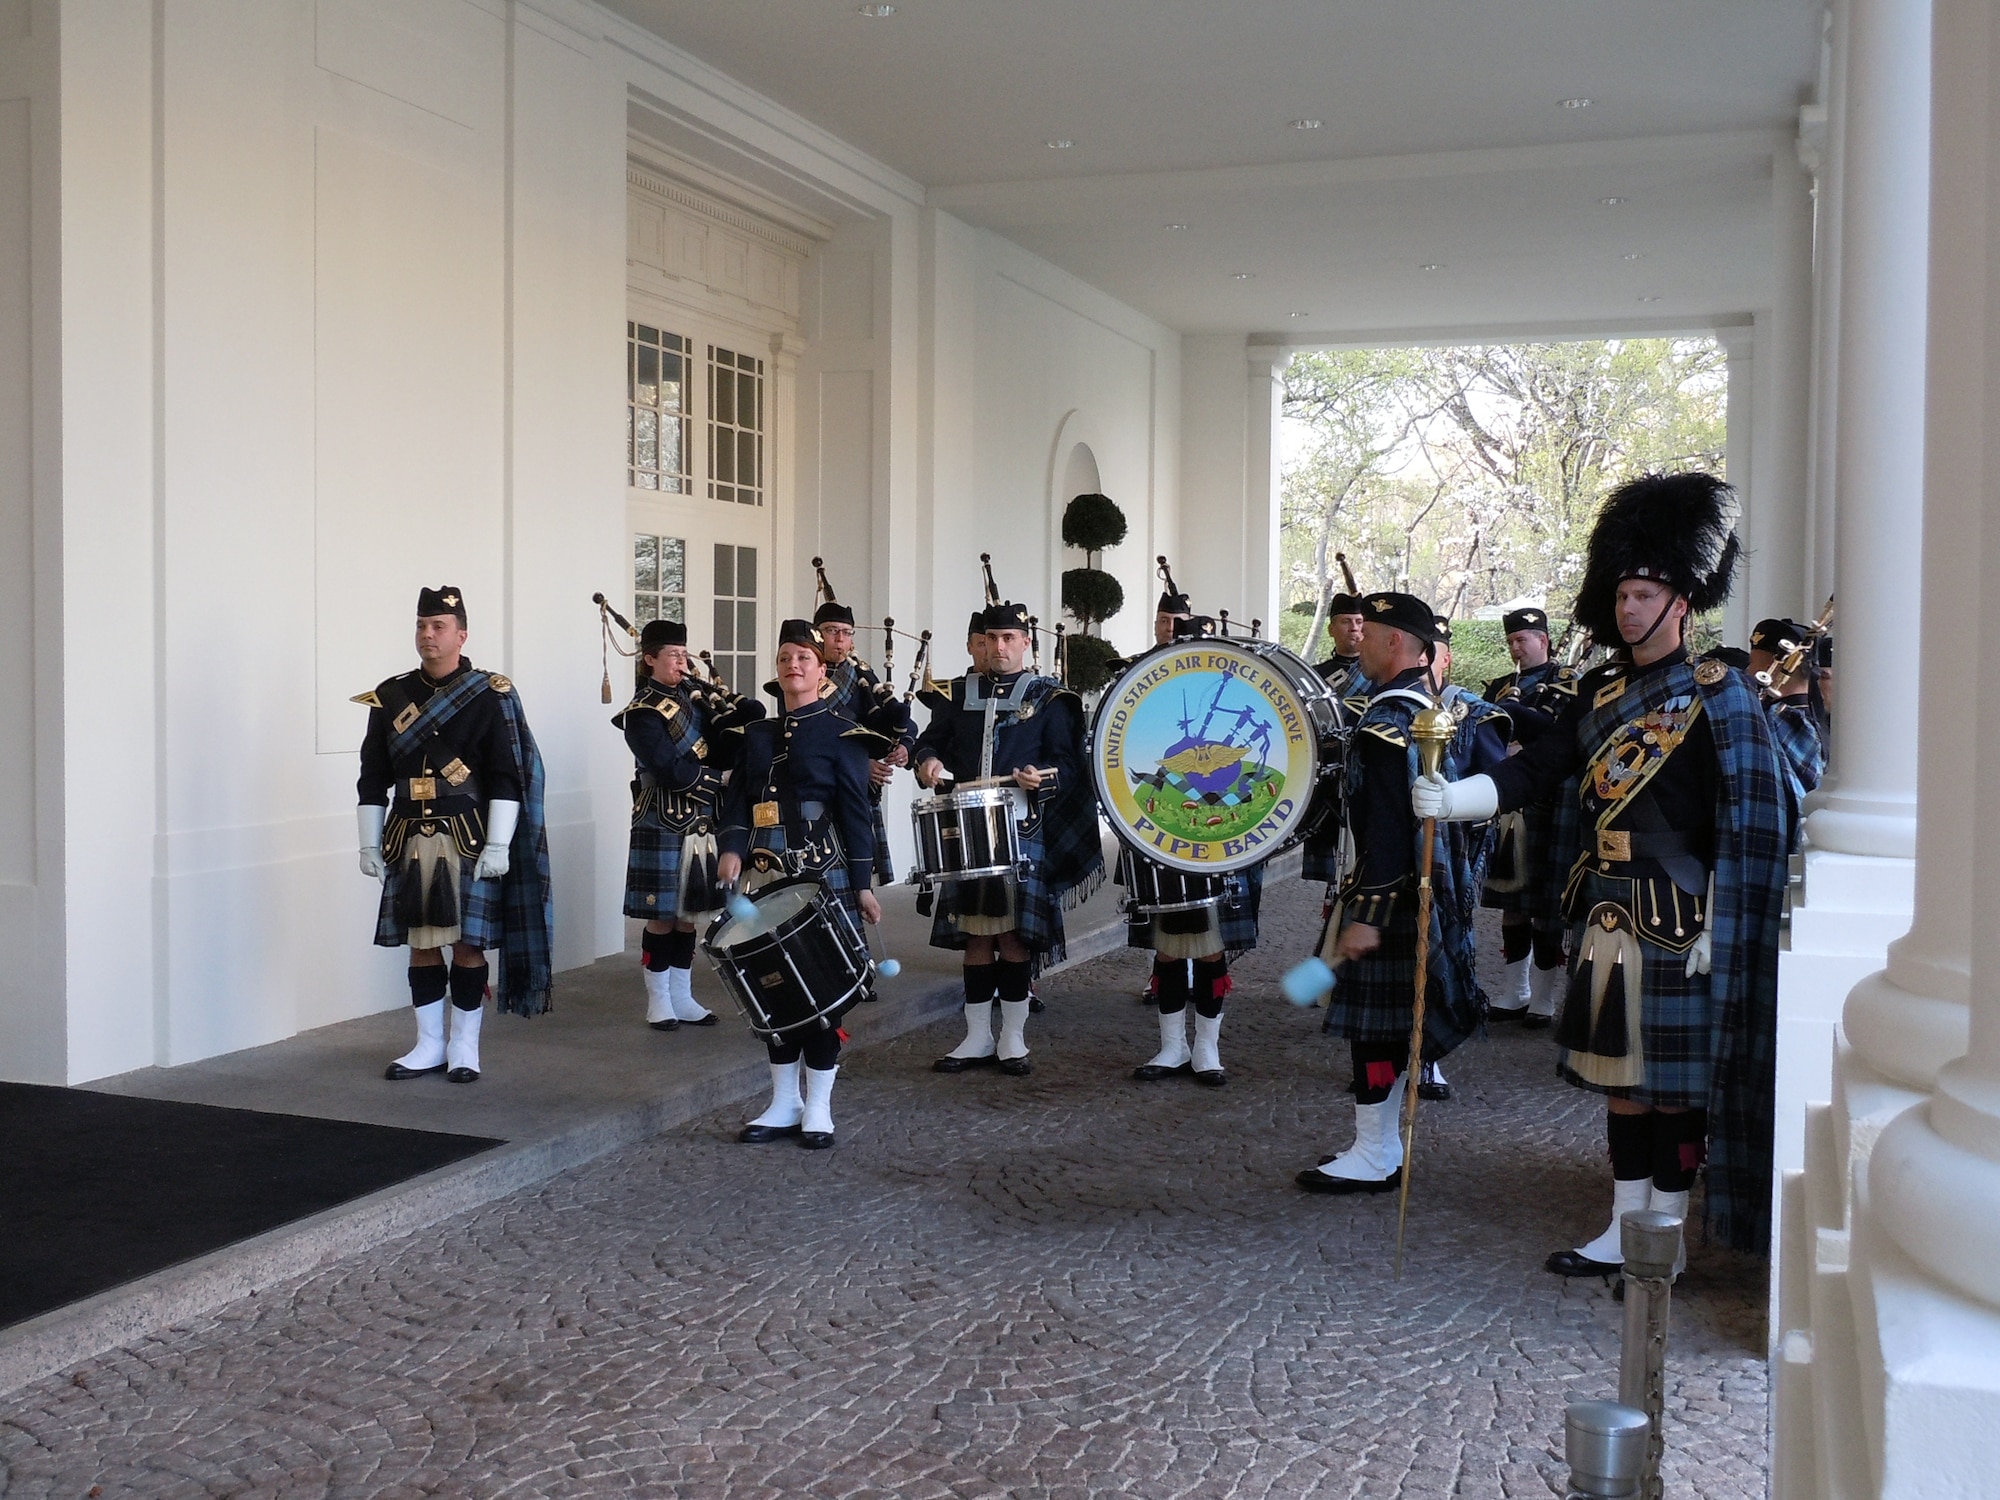 The Band of the Air Force Reserve's pipe band performs at the Carraige Entrance of the White House March 20, 2012, in Washington, D.C. They performed four missions for President Barack Obama and Irish Prime Minister Enda Kenny. The pipers have performed this mission every year since 1995, Elements of the Reserve band perform an average of 279 missions annually in support of Regular Air Force and Air Force Reserve mission taskings. (U.S. Air Force photo by Chief Master Sgt. Mark Burditt)